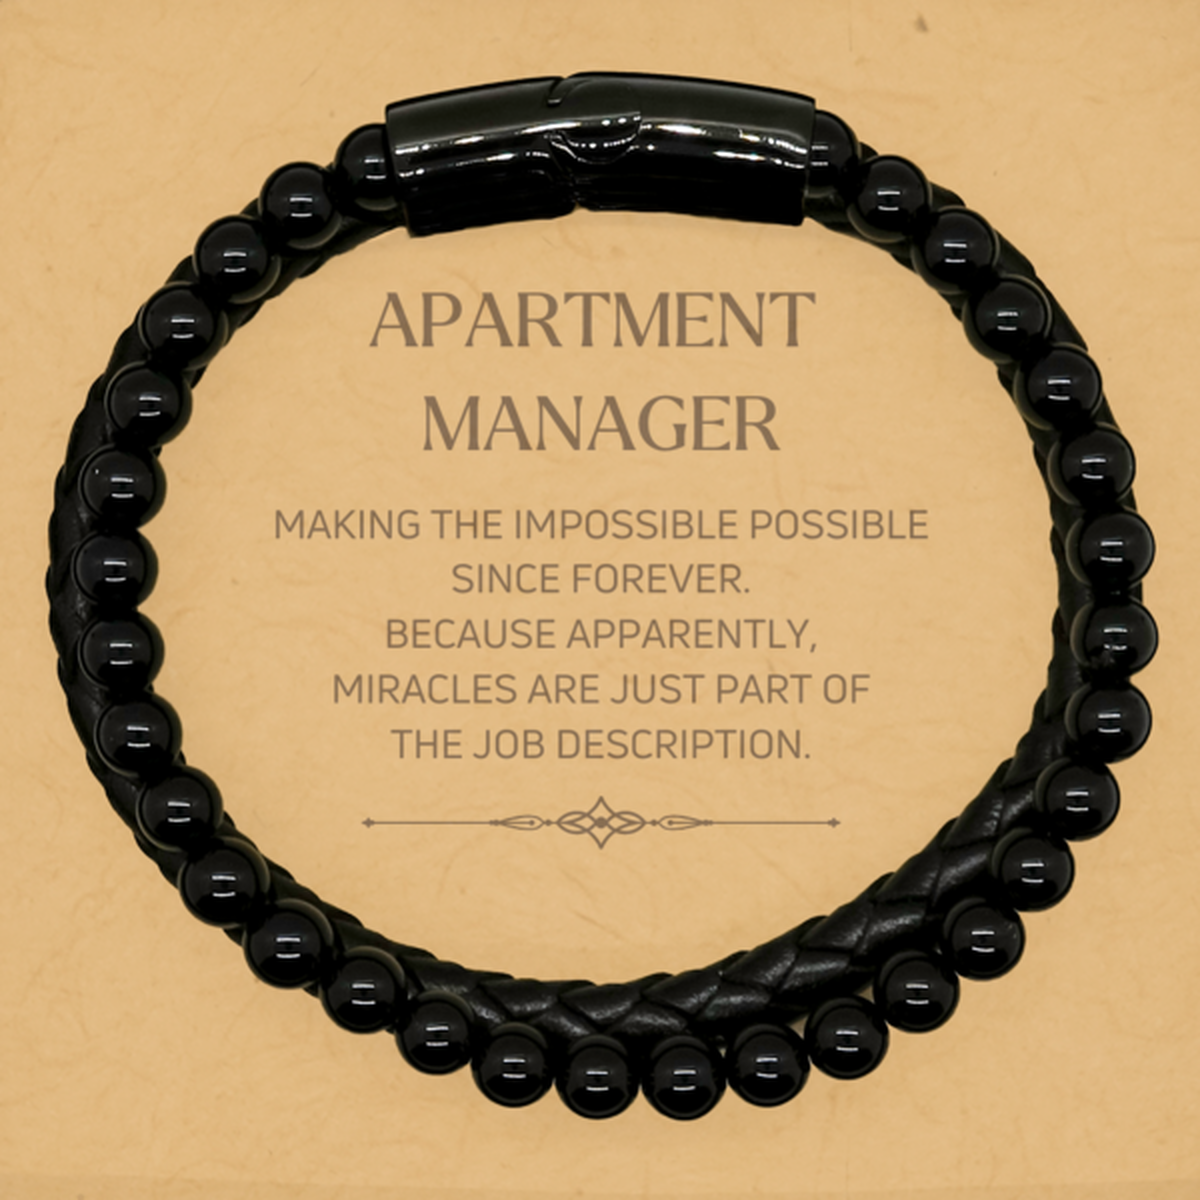 Funny Apartment Manager Gifts, Miracles are just part of the job description, Inspirational Birthday Stone Leather Bracelets For Apartment Manager, Men, Women, Coworkers, Friends, Boss